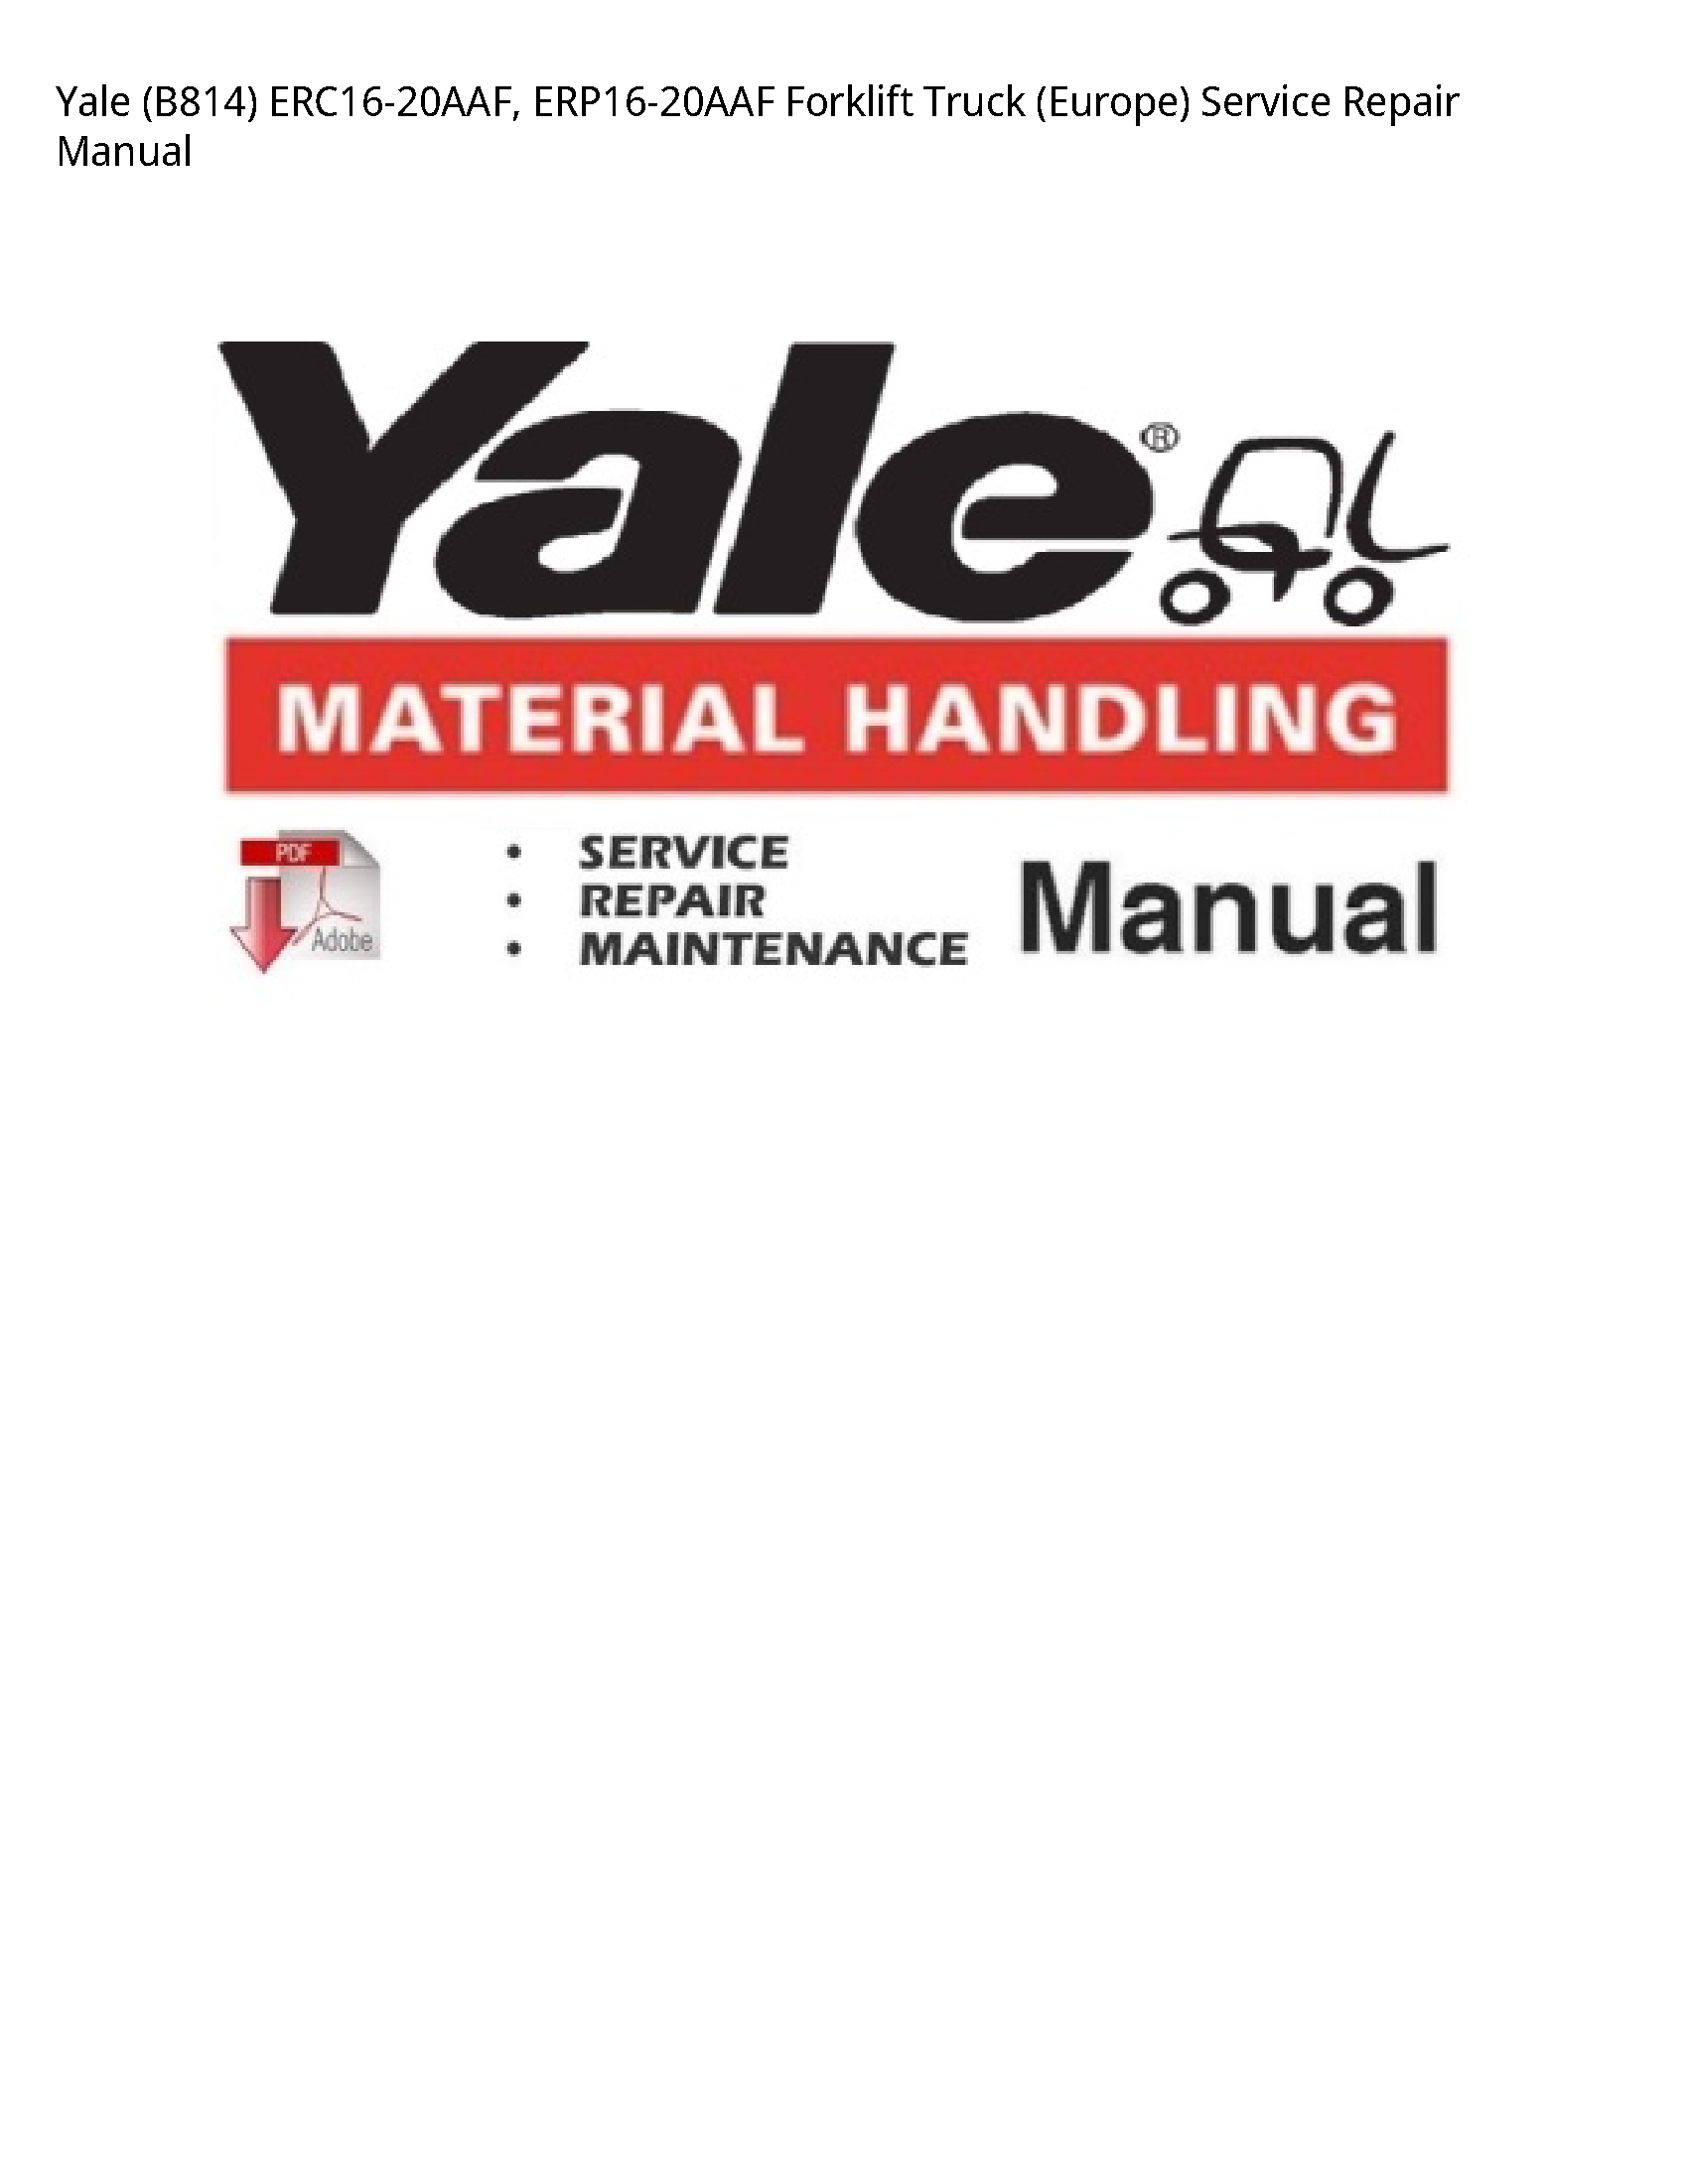 Yale (B814) Forklift Truck (Europe) manual